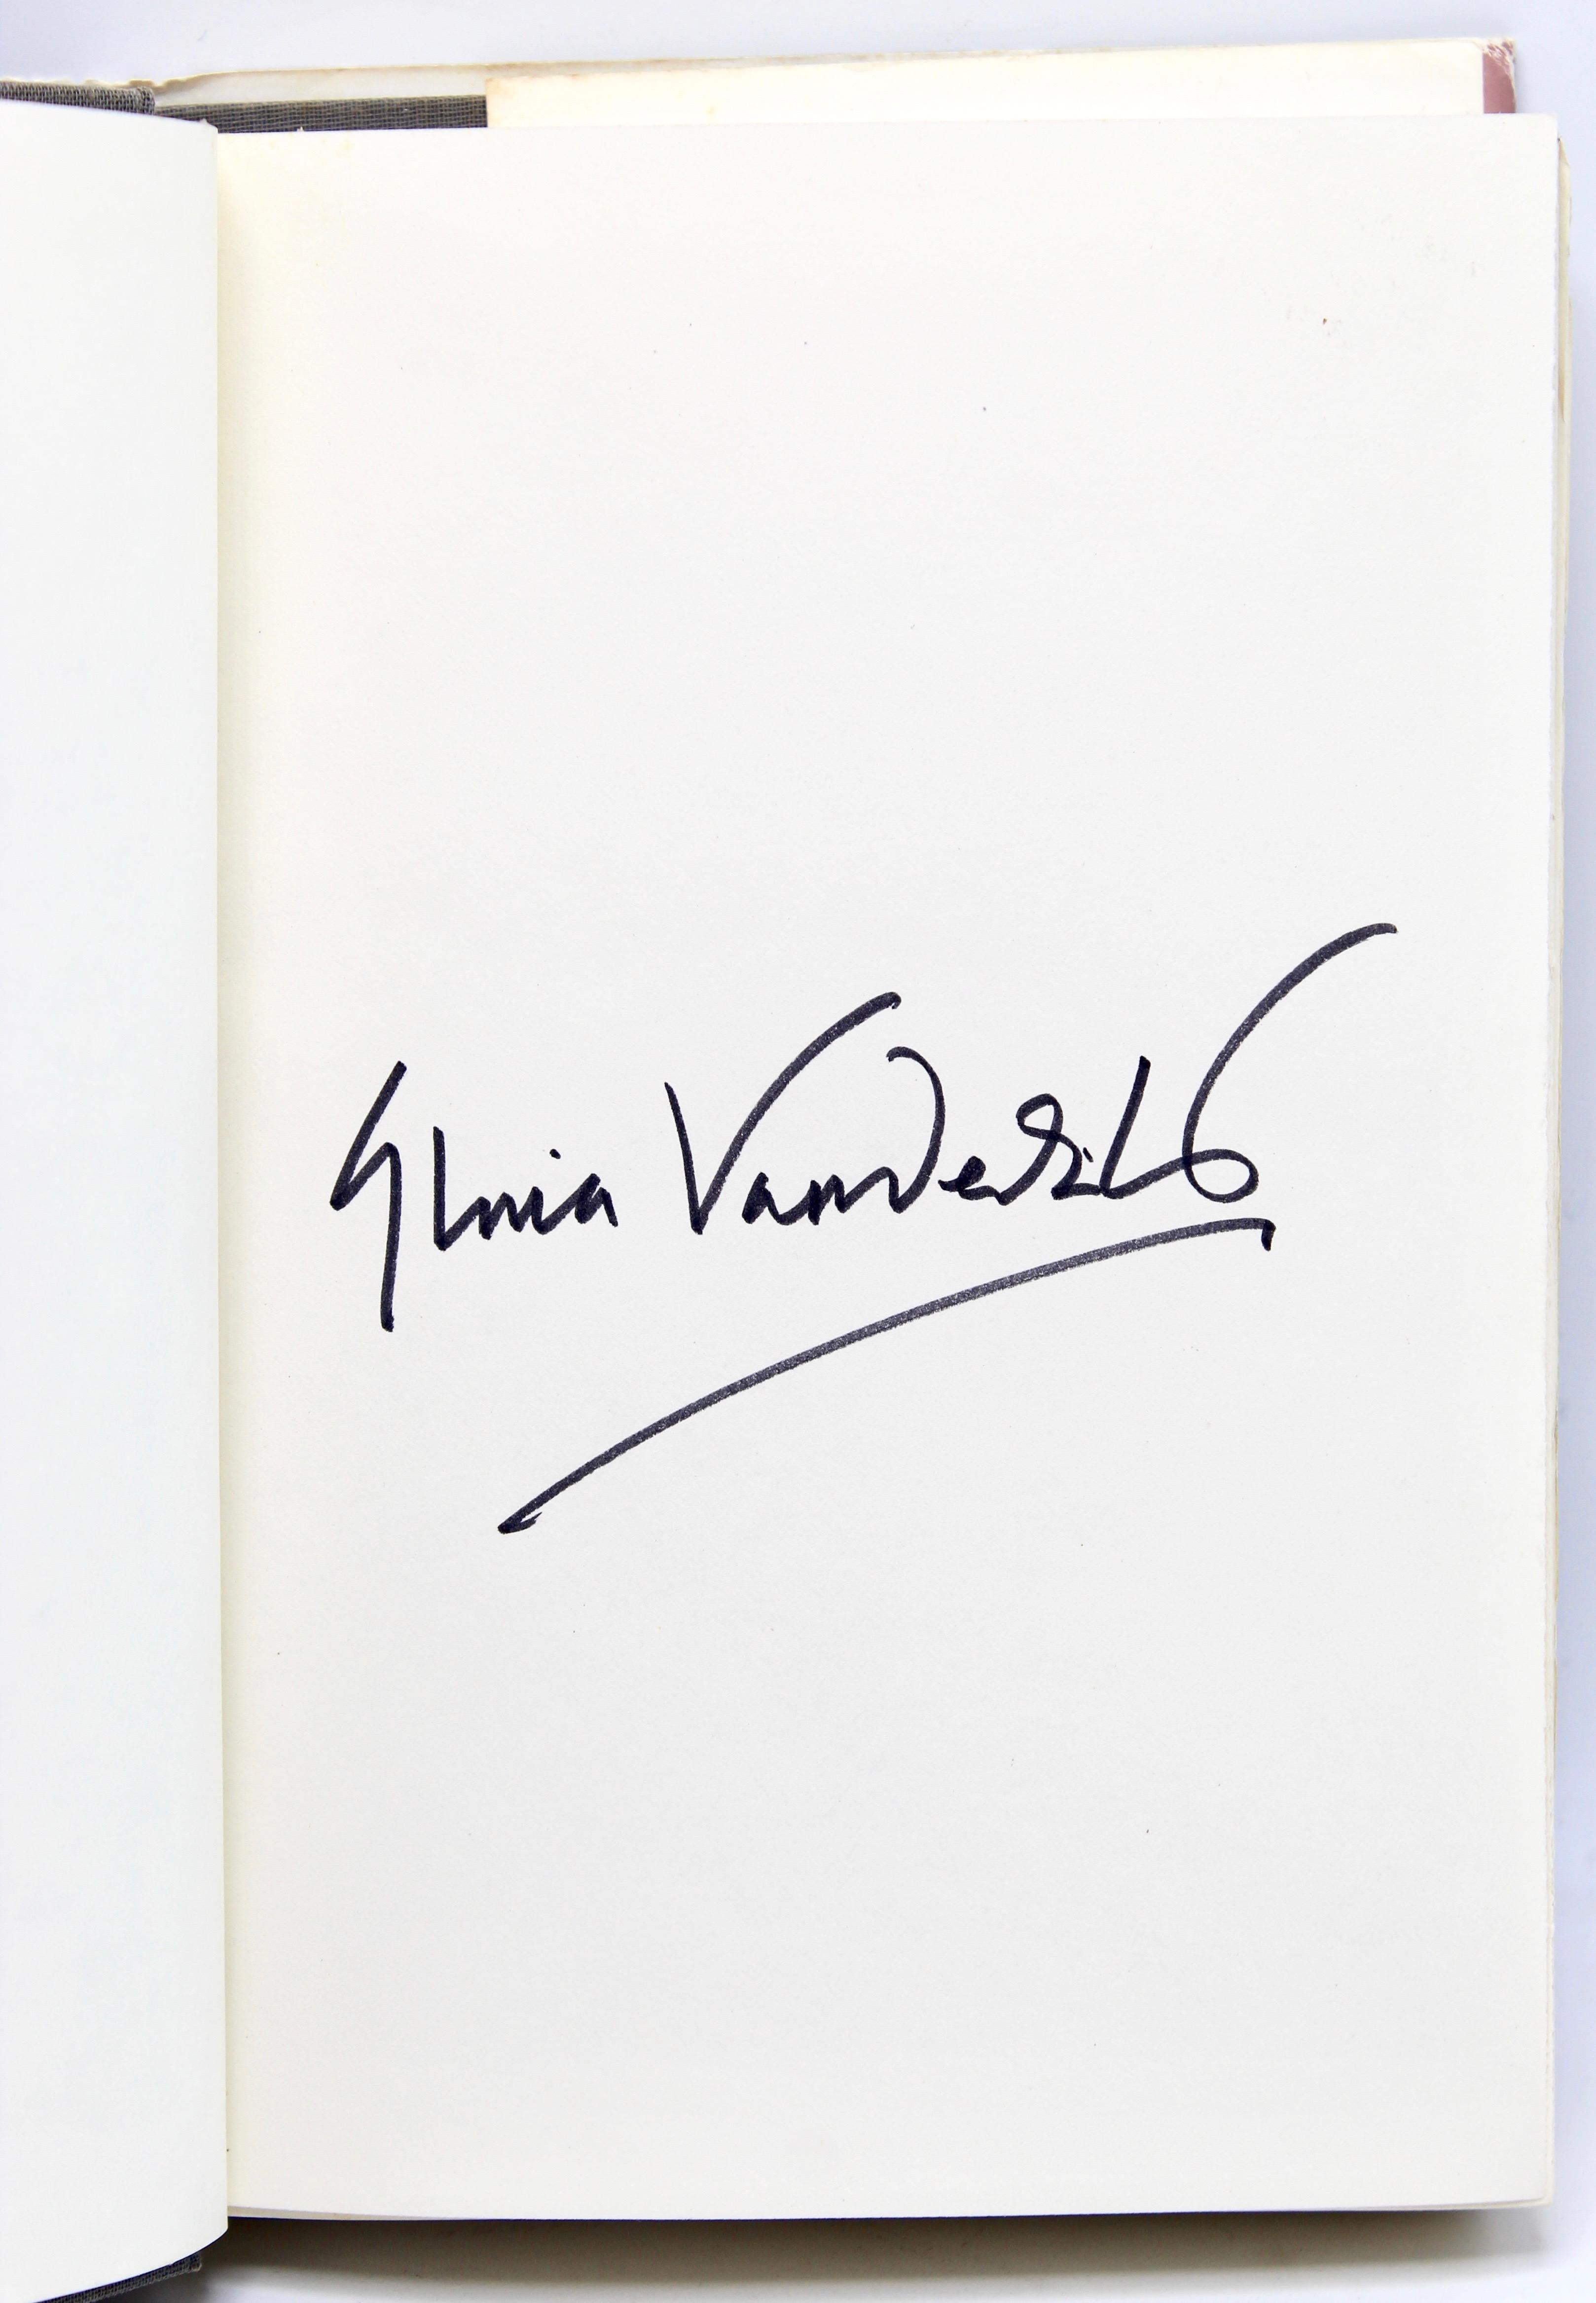 Vanderbilt, Gloria. Once Upon a Time: A True Story. New York: Alfred A. Knopf, 1985. First Edition, signed by Gloria Vanderbilt. Original Dust Jacket.

This is a first edition of Gloria Vanderbilt’s famous memoir, Once Upon a Time: A True Story.